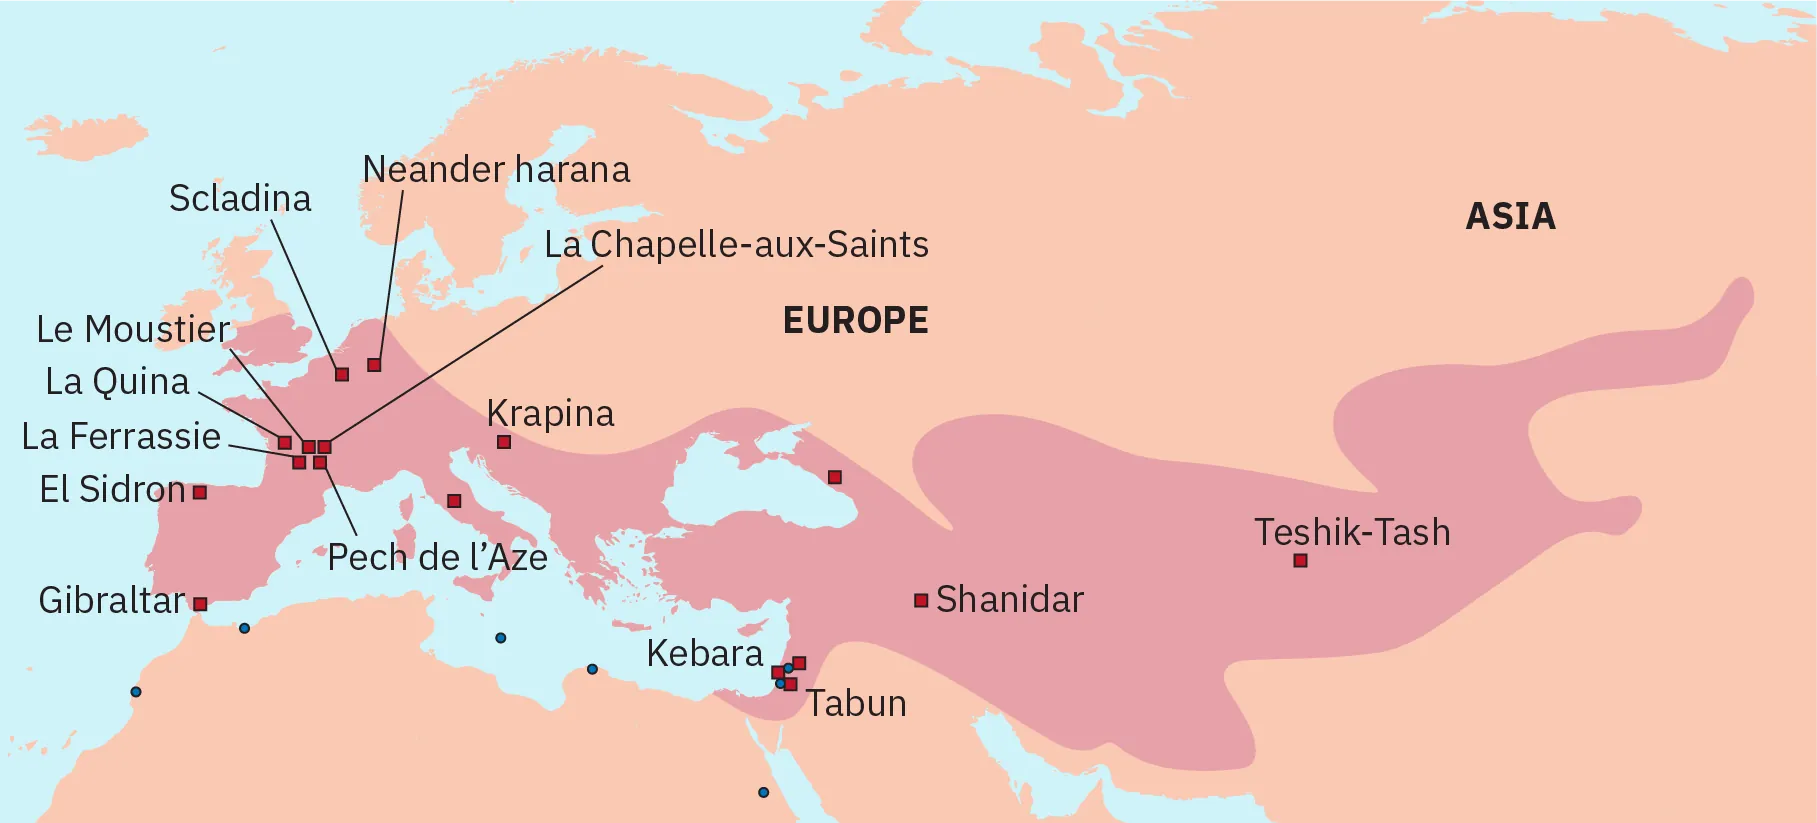 Site locations and territory appear in Europe, the Middle East, and an interior portion of Asia.